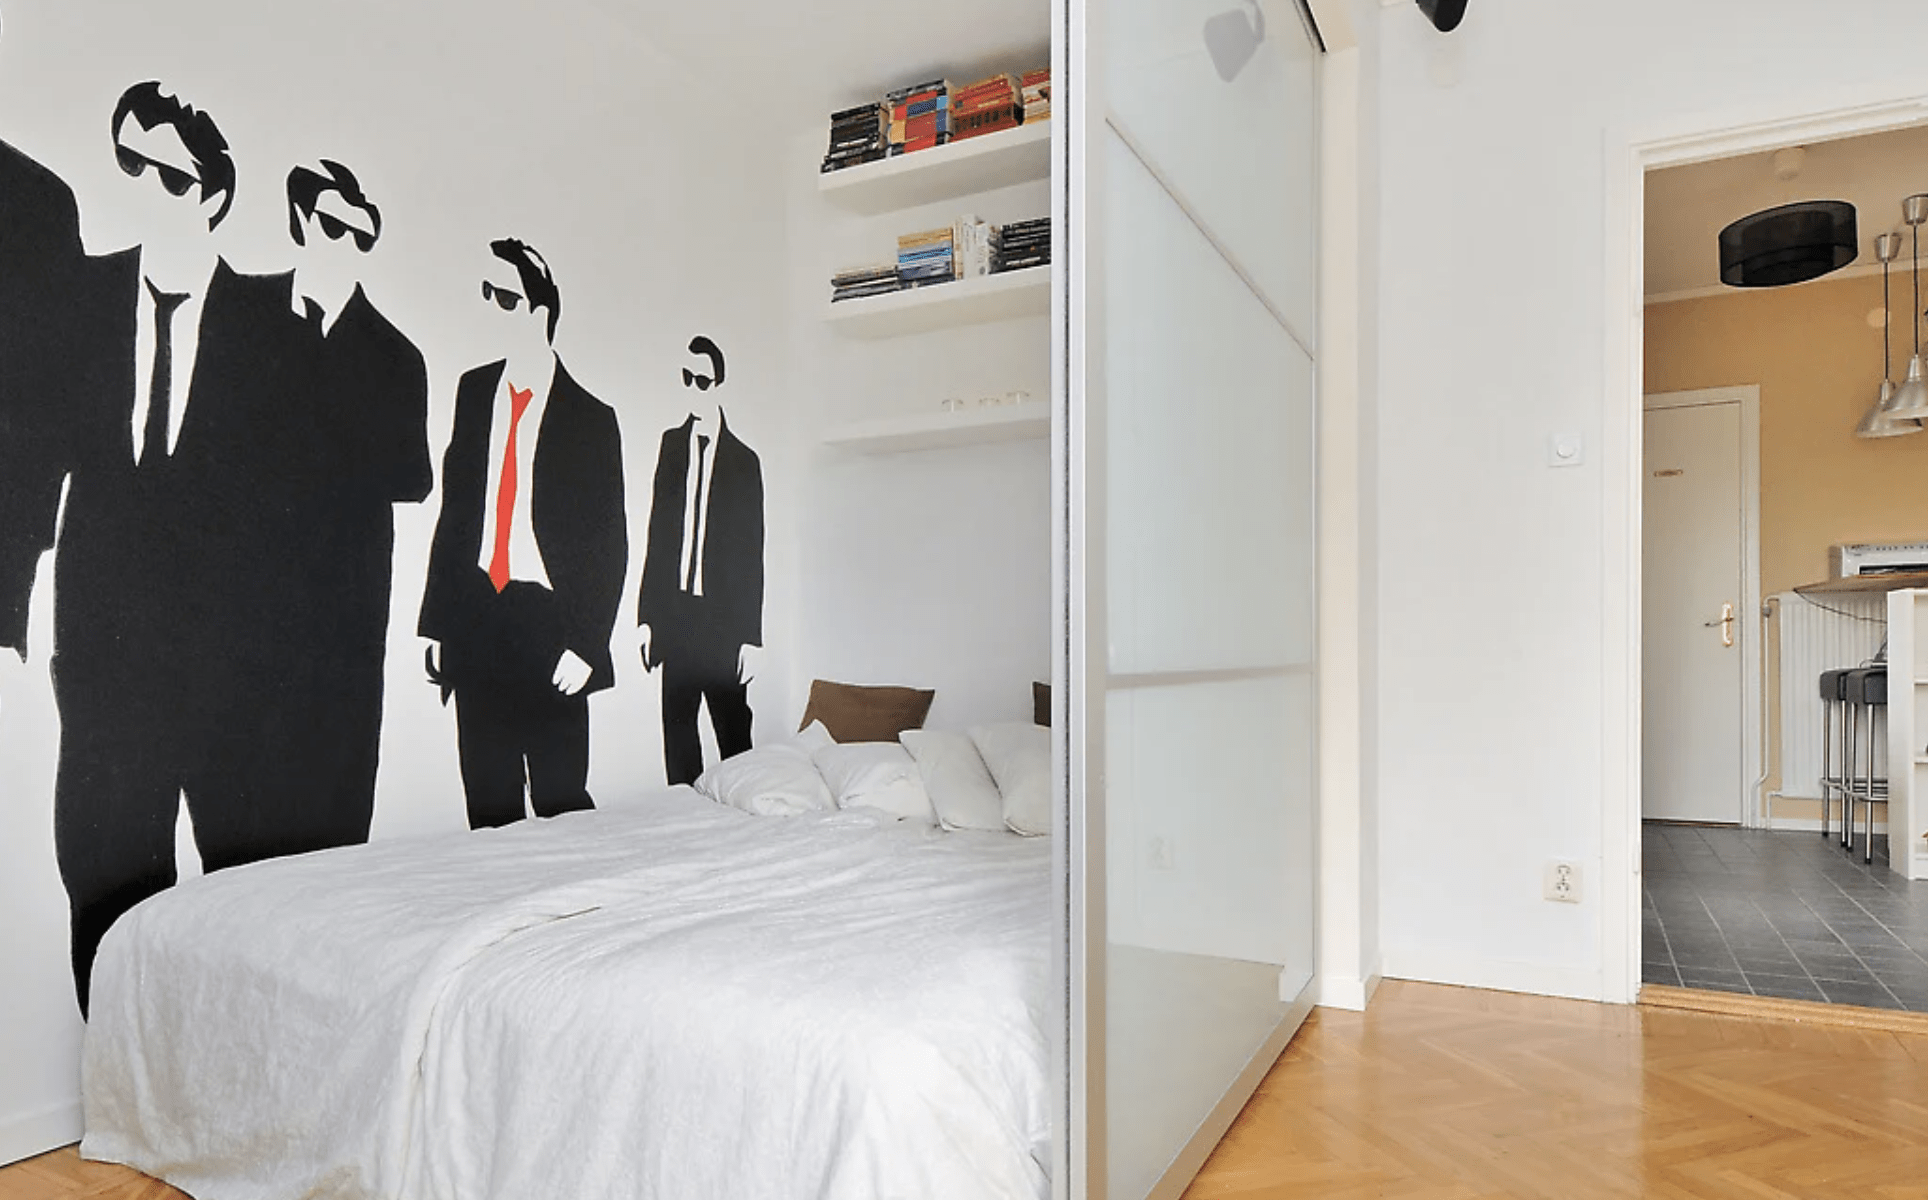 small apartment with ikea frosted glass doors separating off bed from living area silhouette of suited men with sunglasses on wall red tie